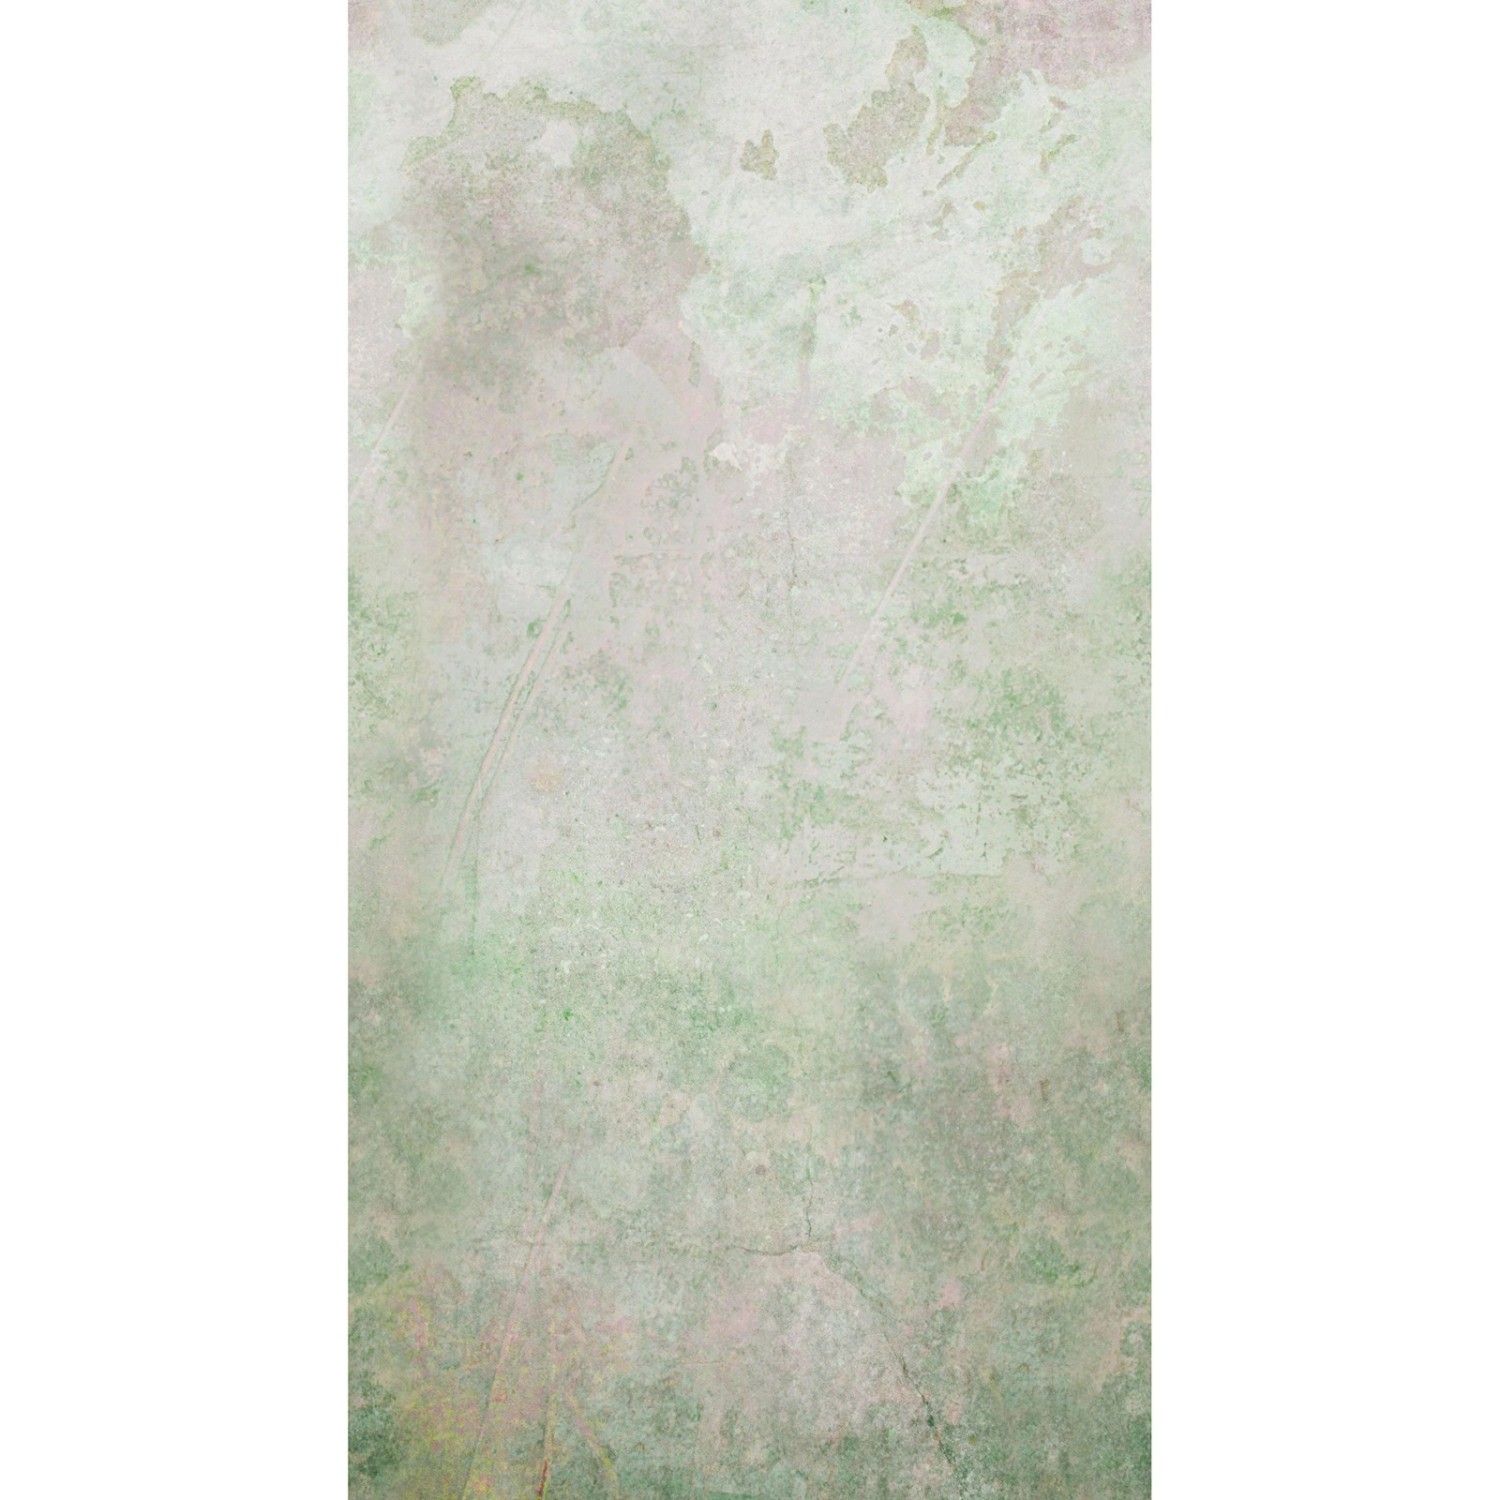 Art for the Home Fototapete Pure nature faded 280 x 150 cm